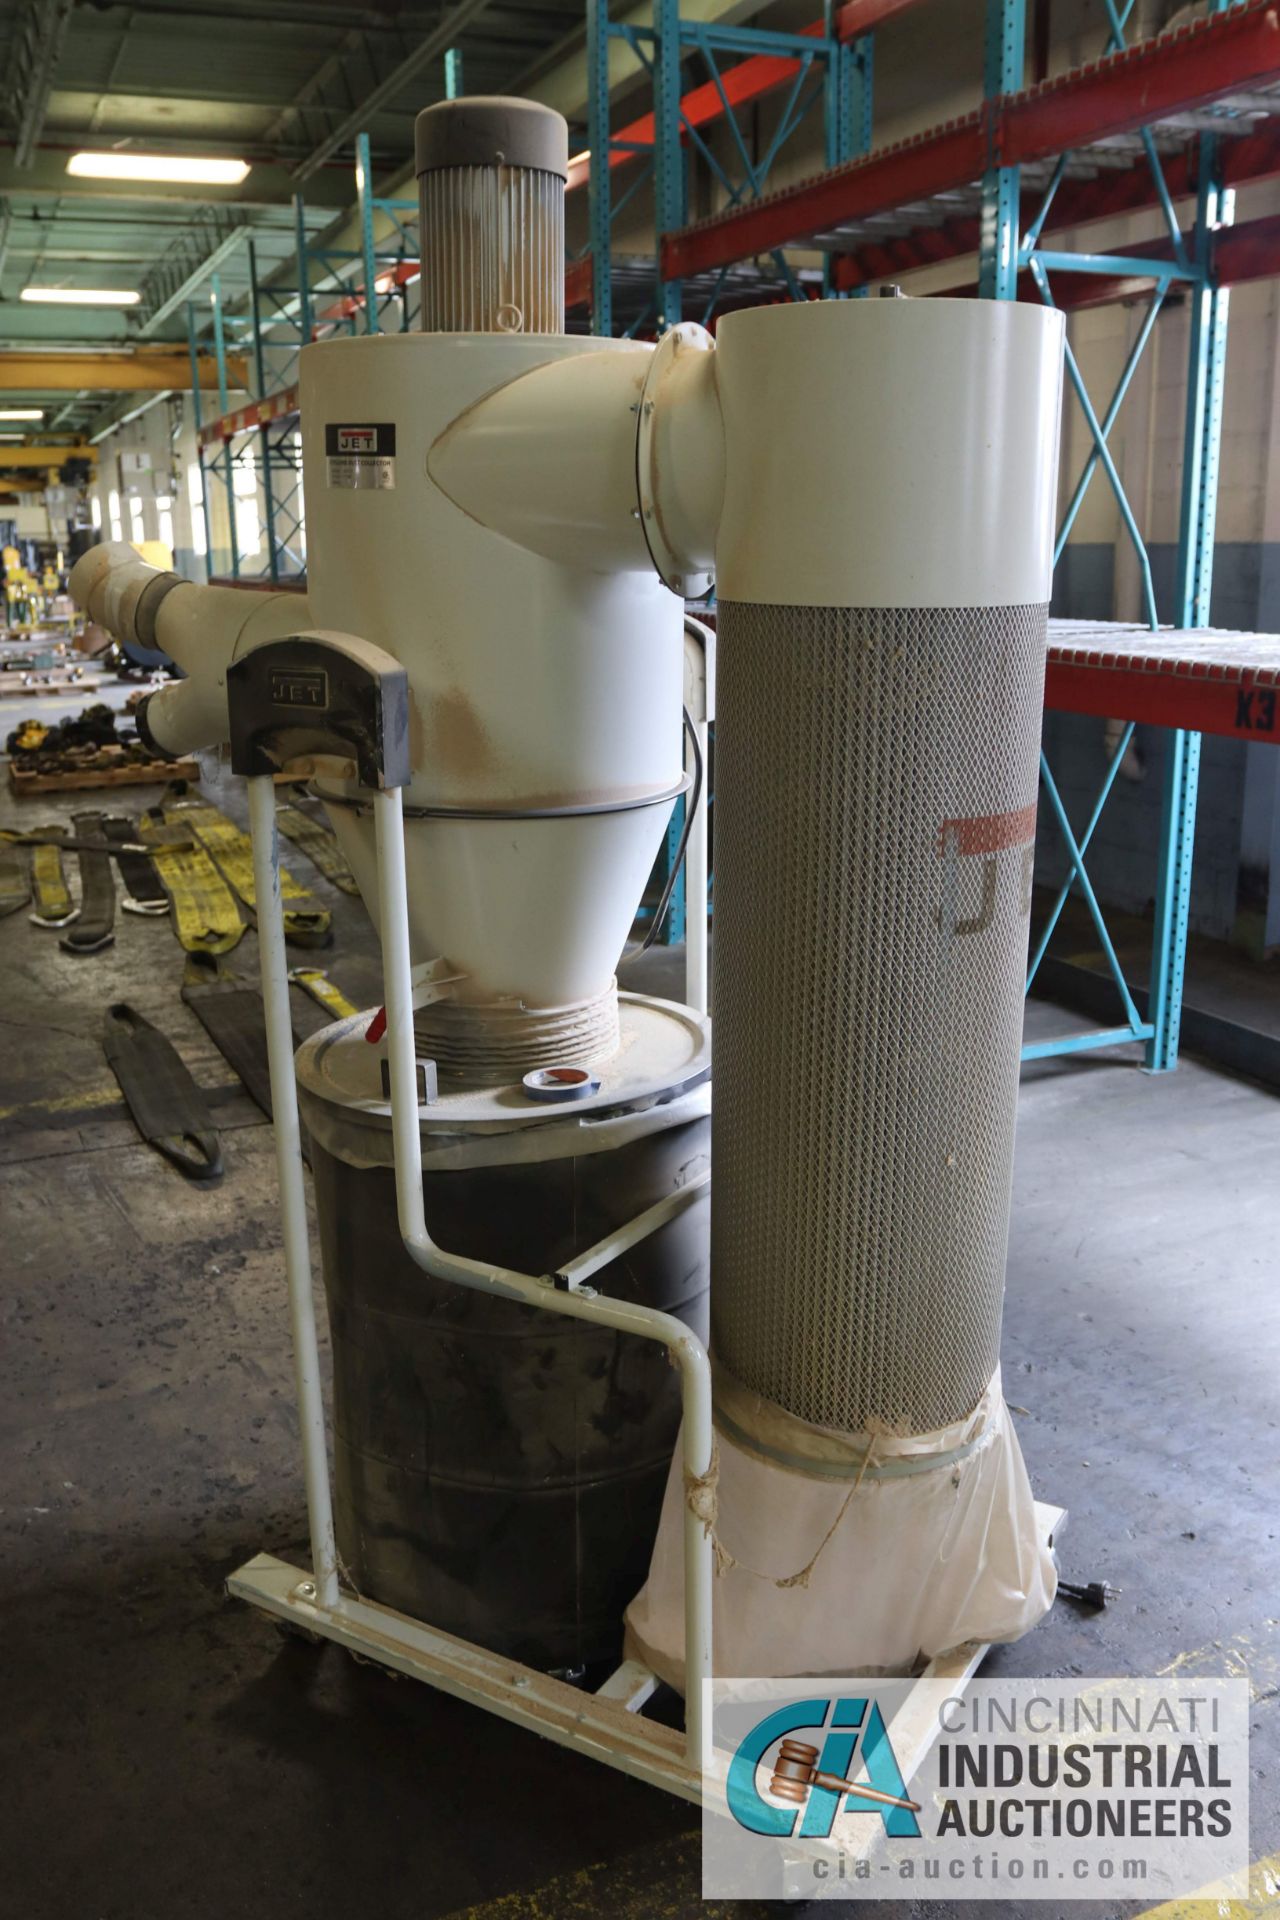 3 HP JET MODEL JCDC-3 DUST COLLECTOR; STOCK #717530, S/N 17010823 - $20.00 Rigging Fee Due to Onsite